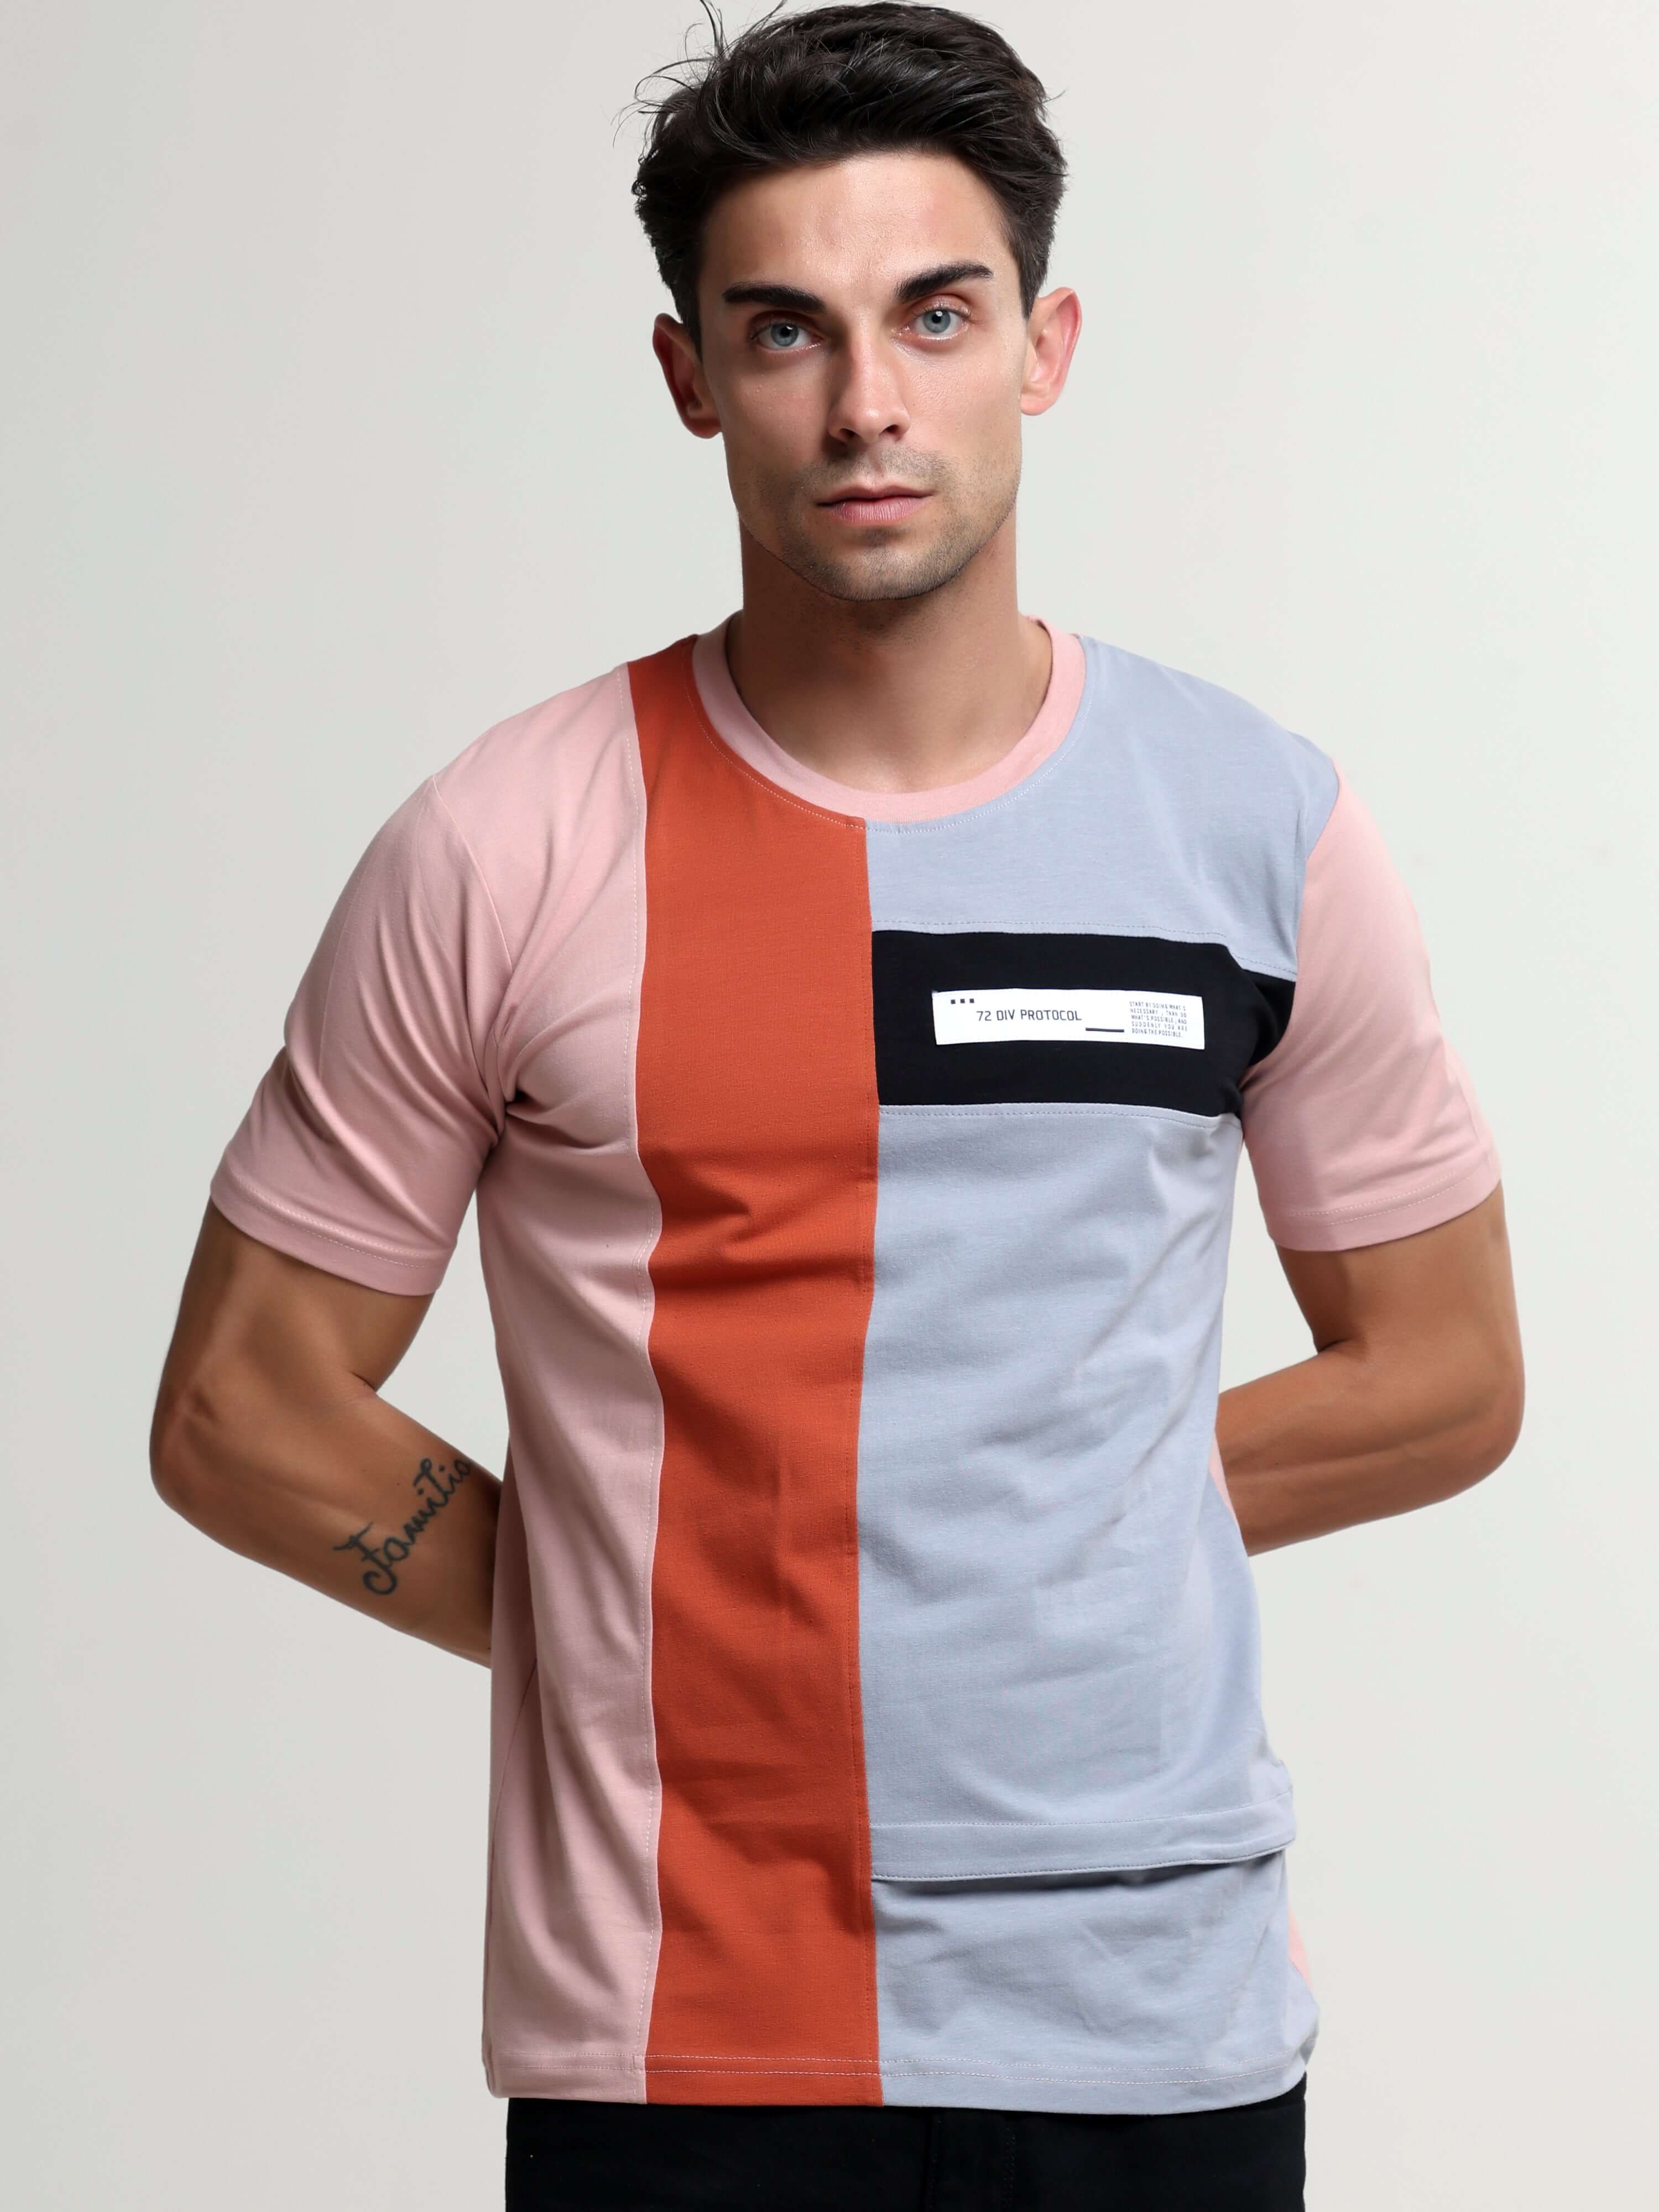 Ignite Pastel Pink T-Shirt | Light & Comfy | Shop Now shop online at Estilocus. Elevate your style with our Ignite pastel pink, lightweight T-shirt. Perfect crewneck fit for a chic, casual look with jeans. Shop your fit today!